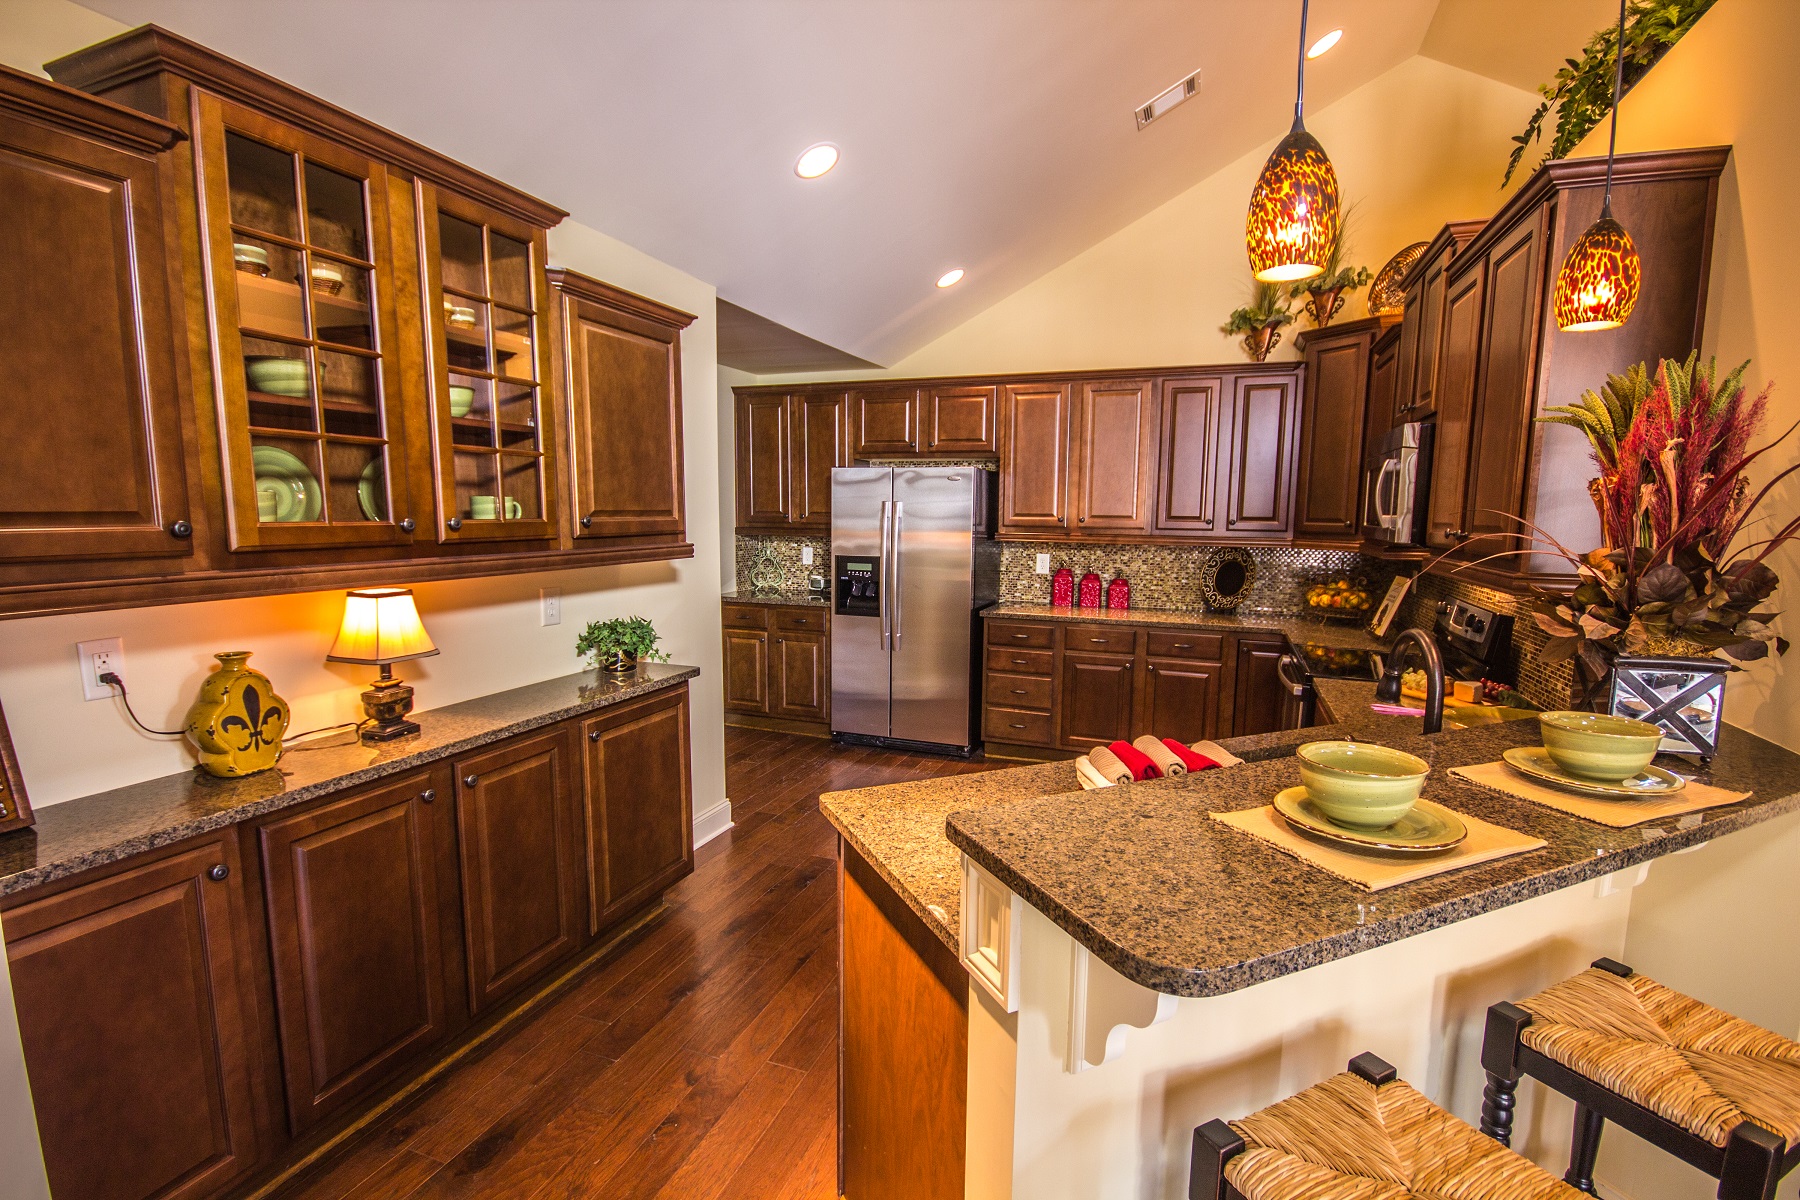 Spacious kitchens with plenty of cabinets and countertop space.